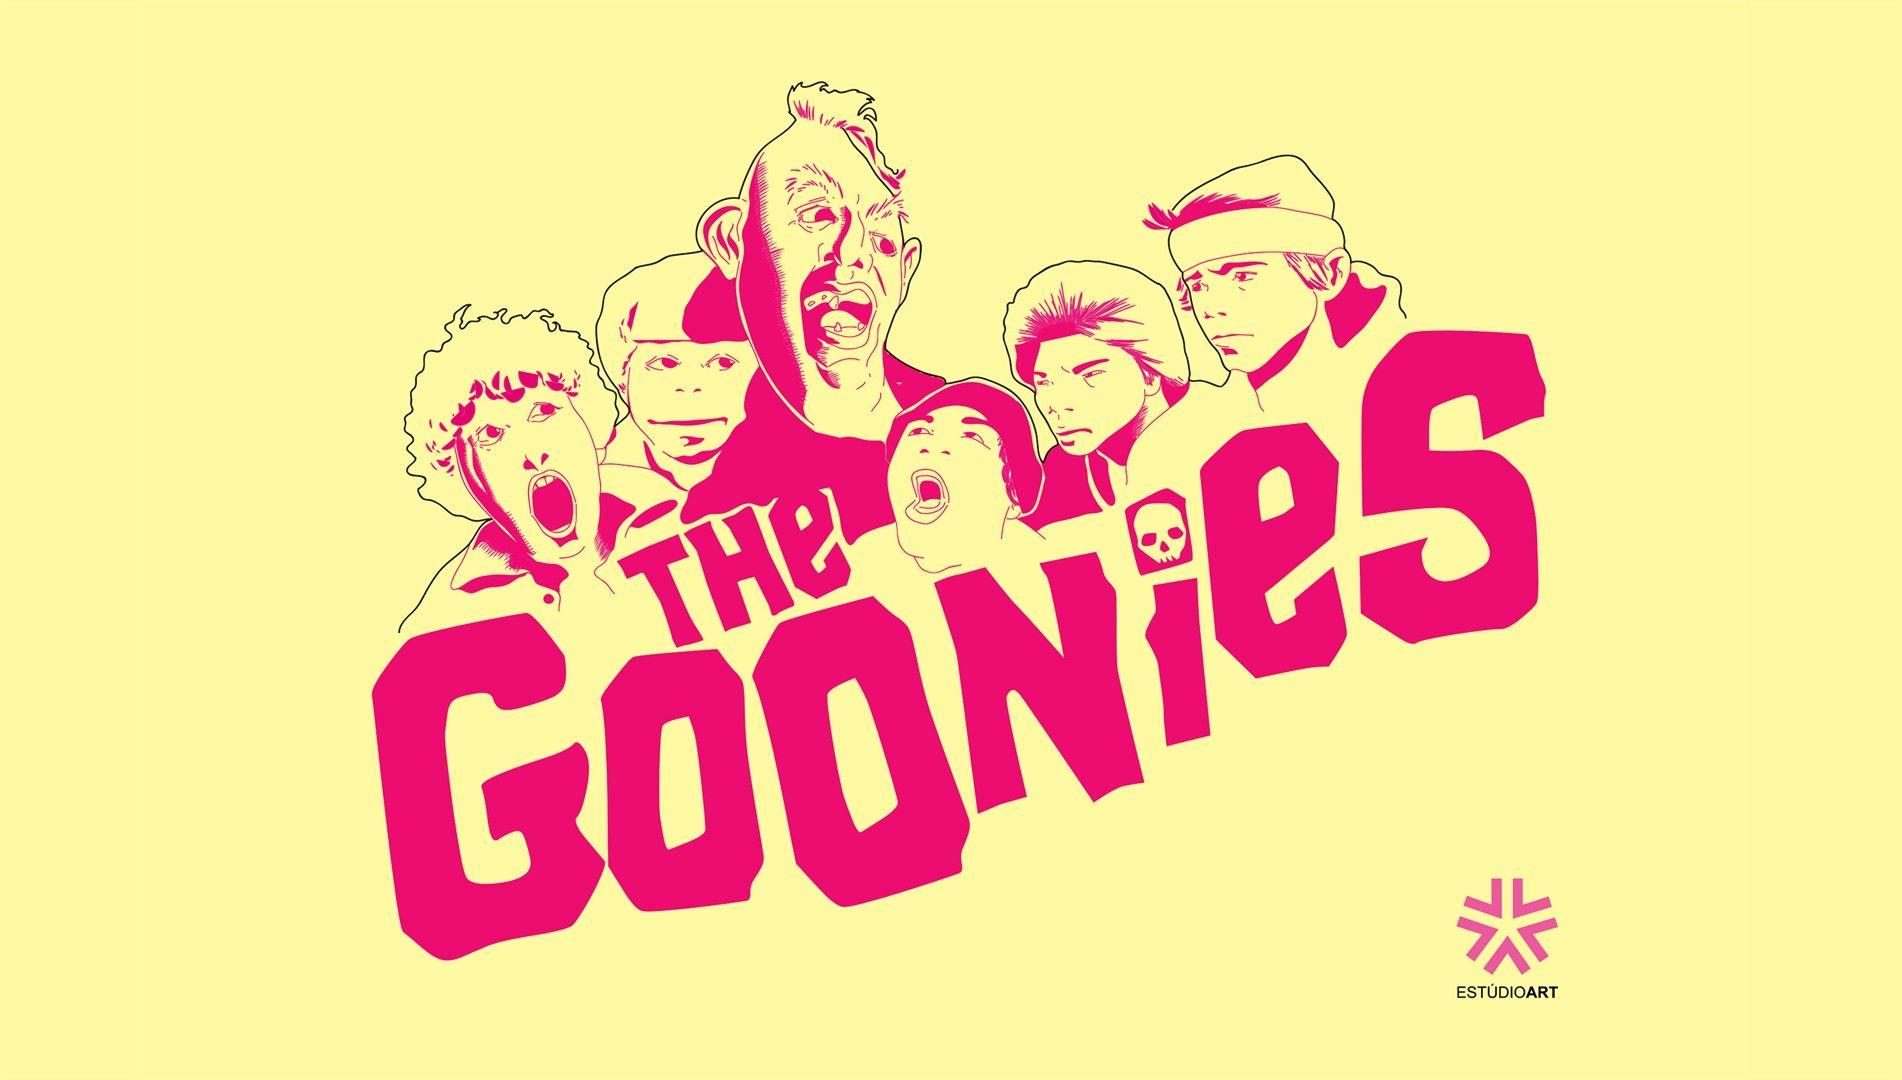 Anyone a fan of the Goonies? wallpapers